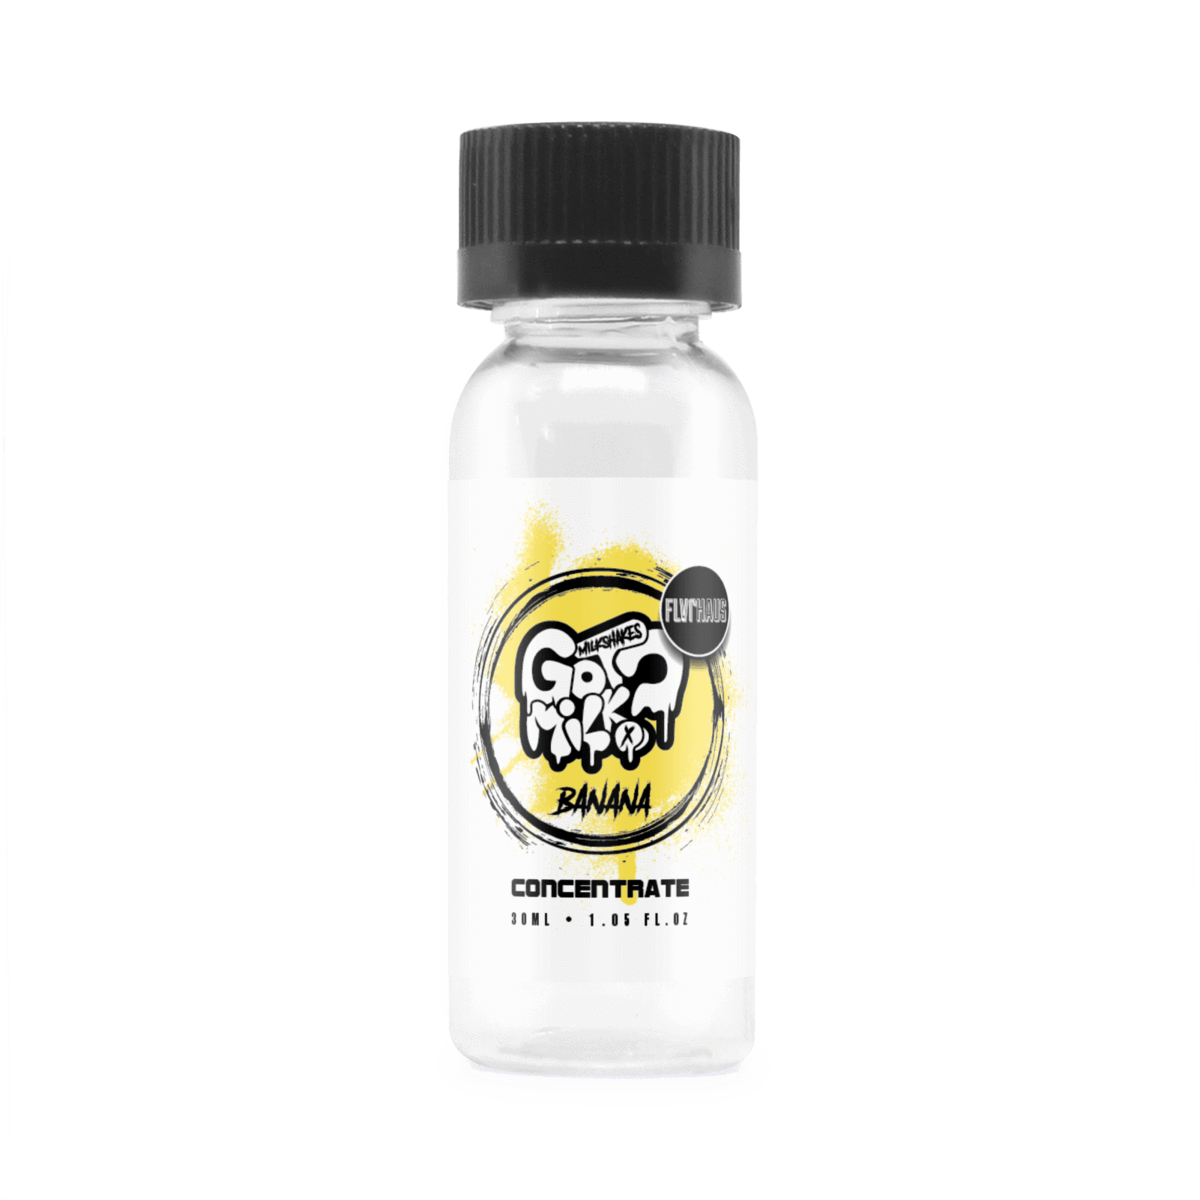 Banana Flavour Concentrate by Got Milk?